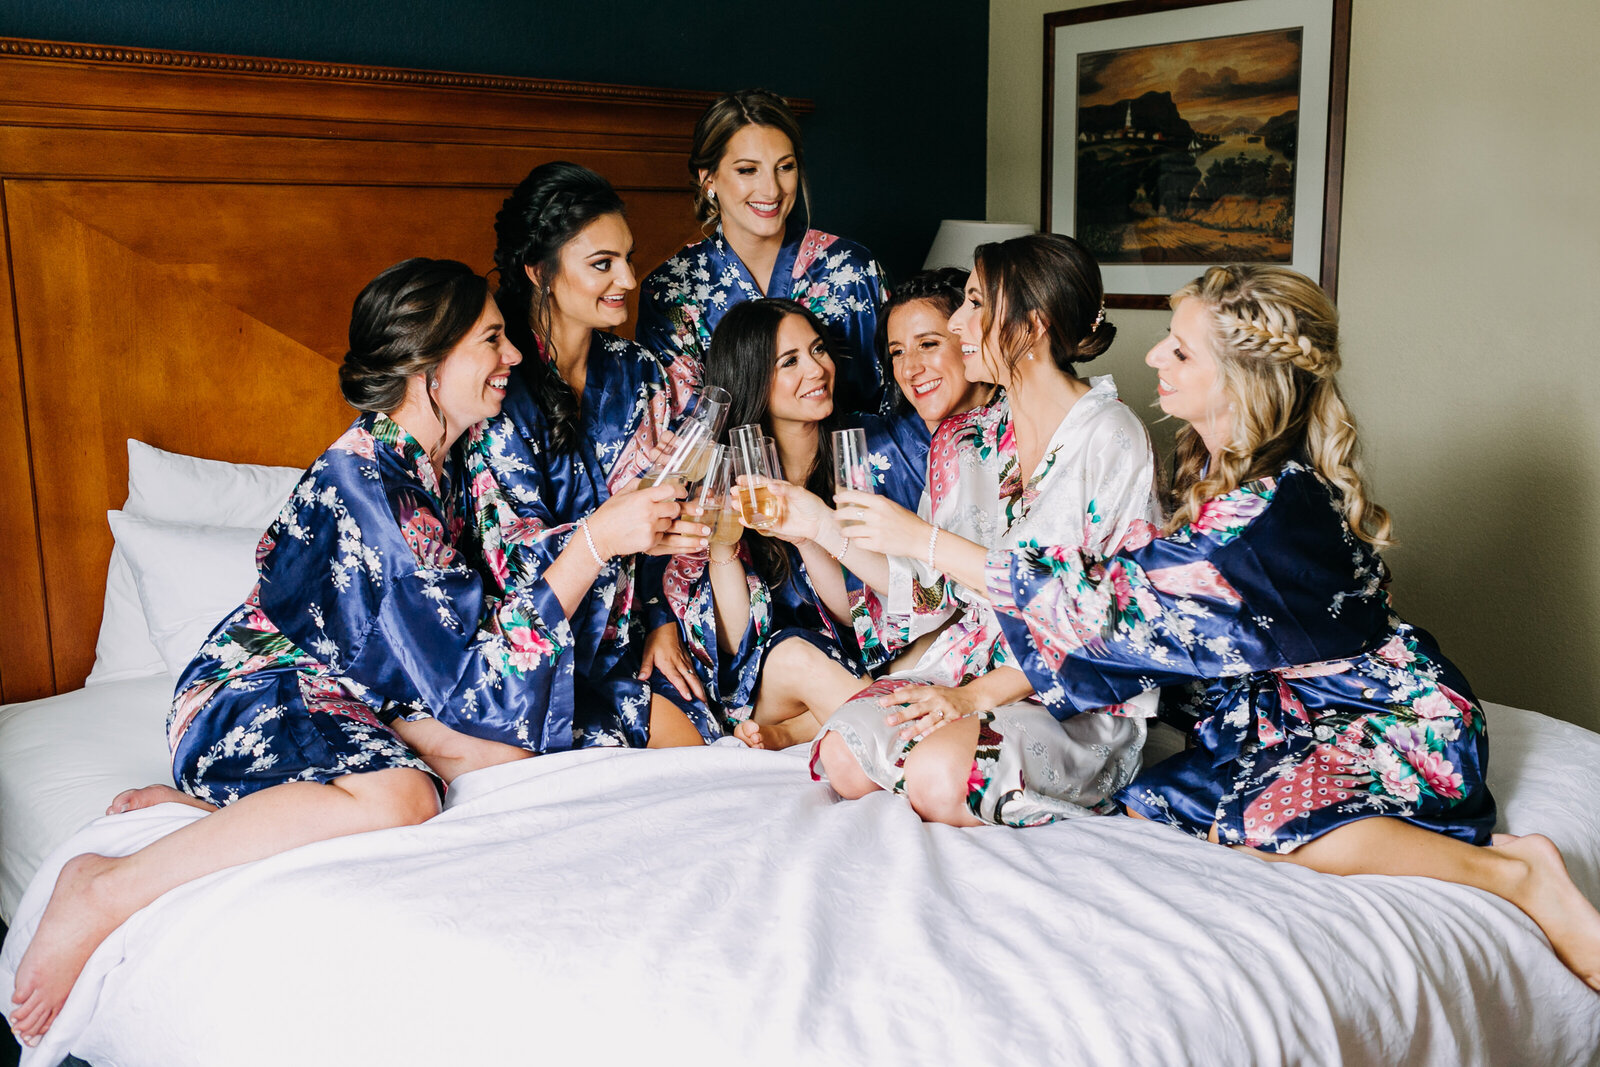 bride and bridesmaids cheering with champagne